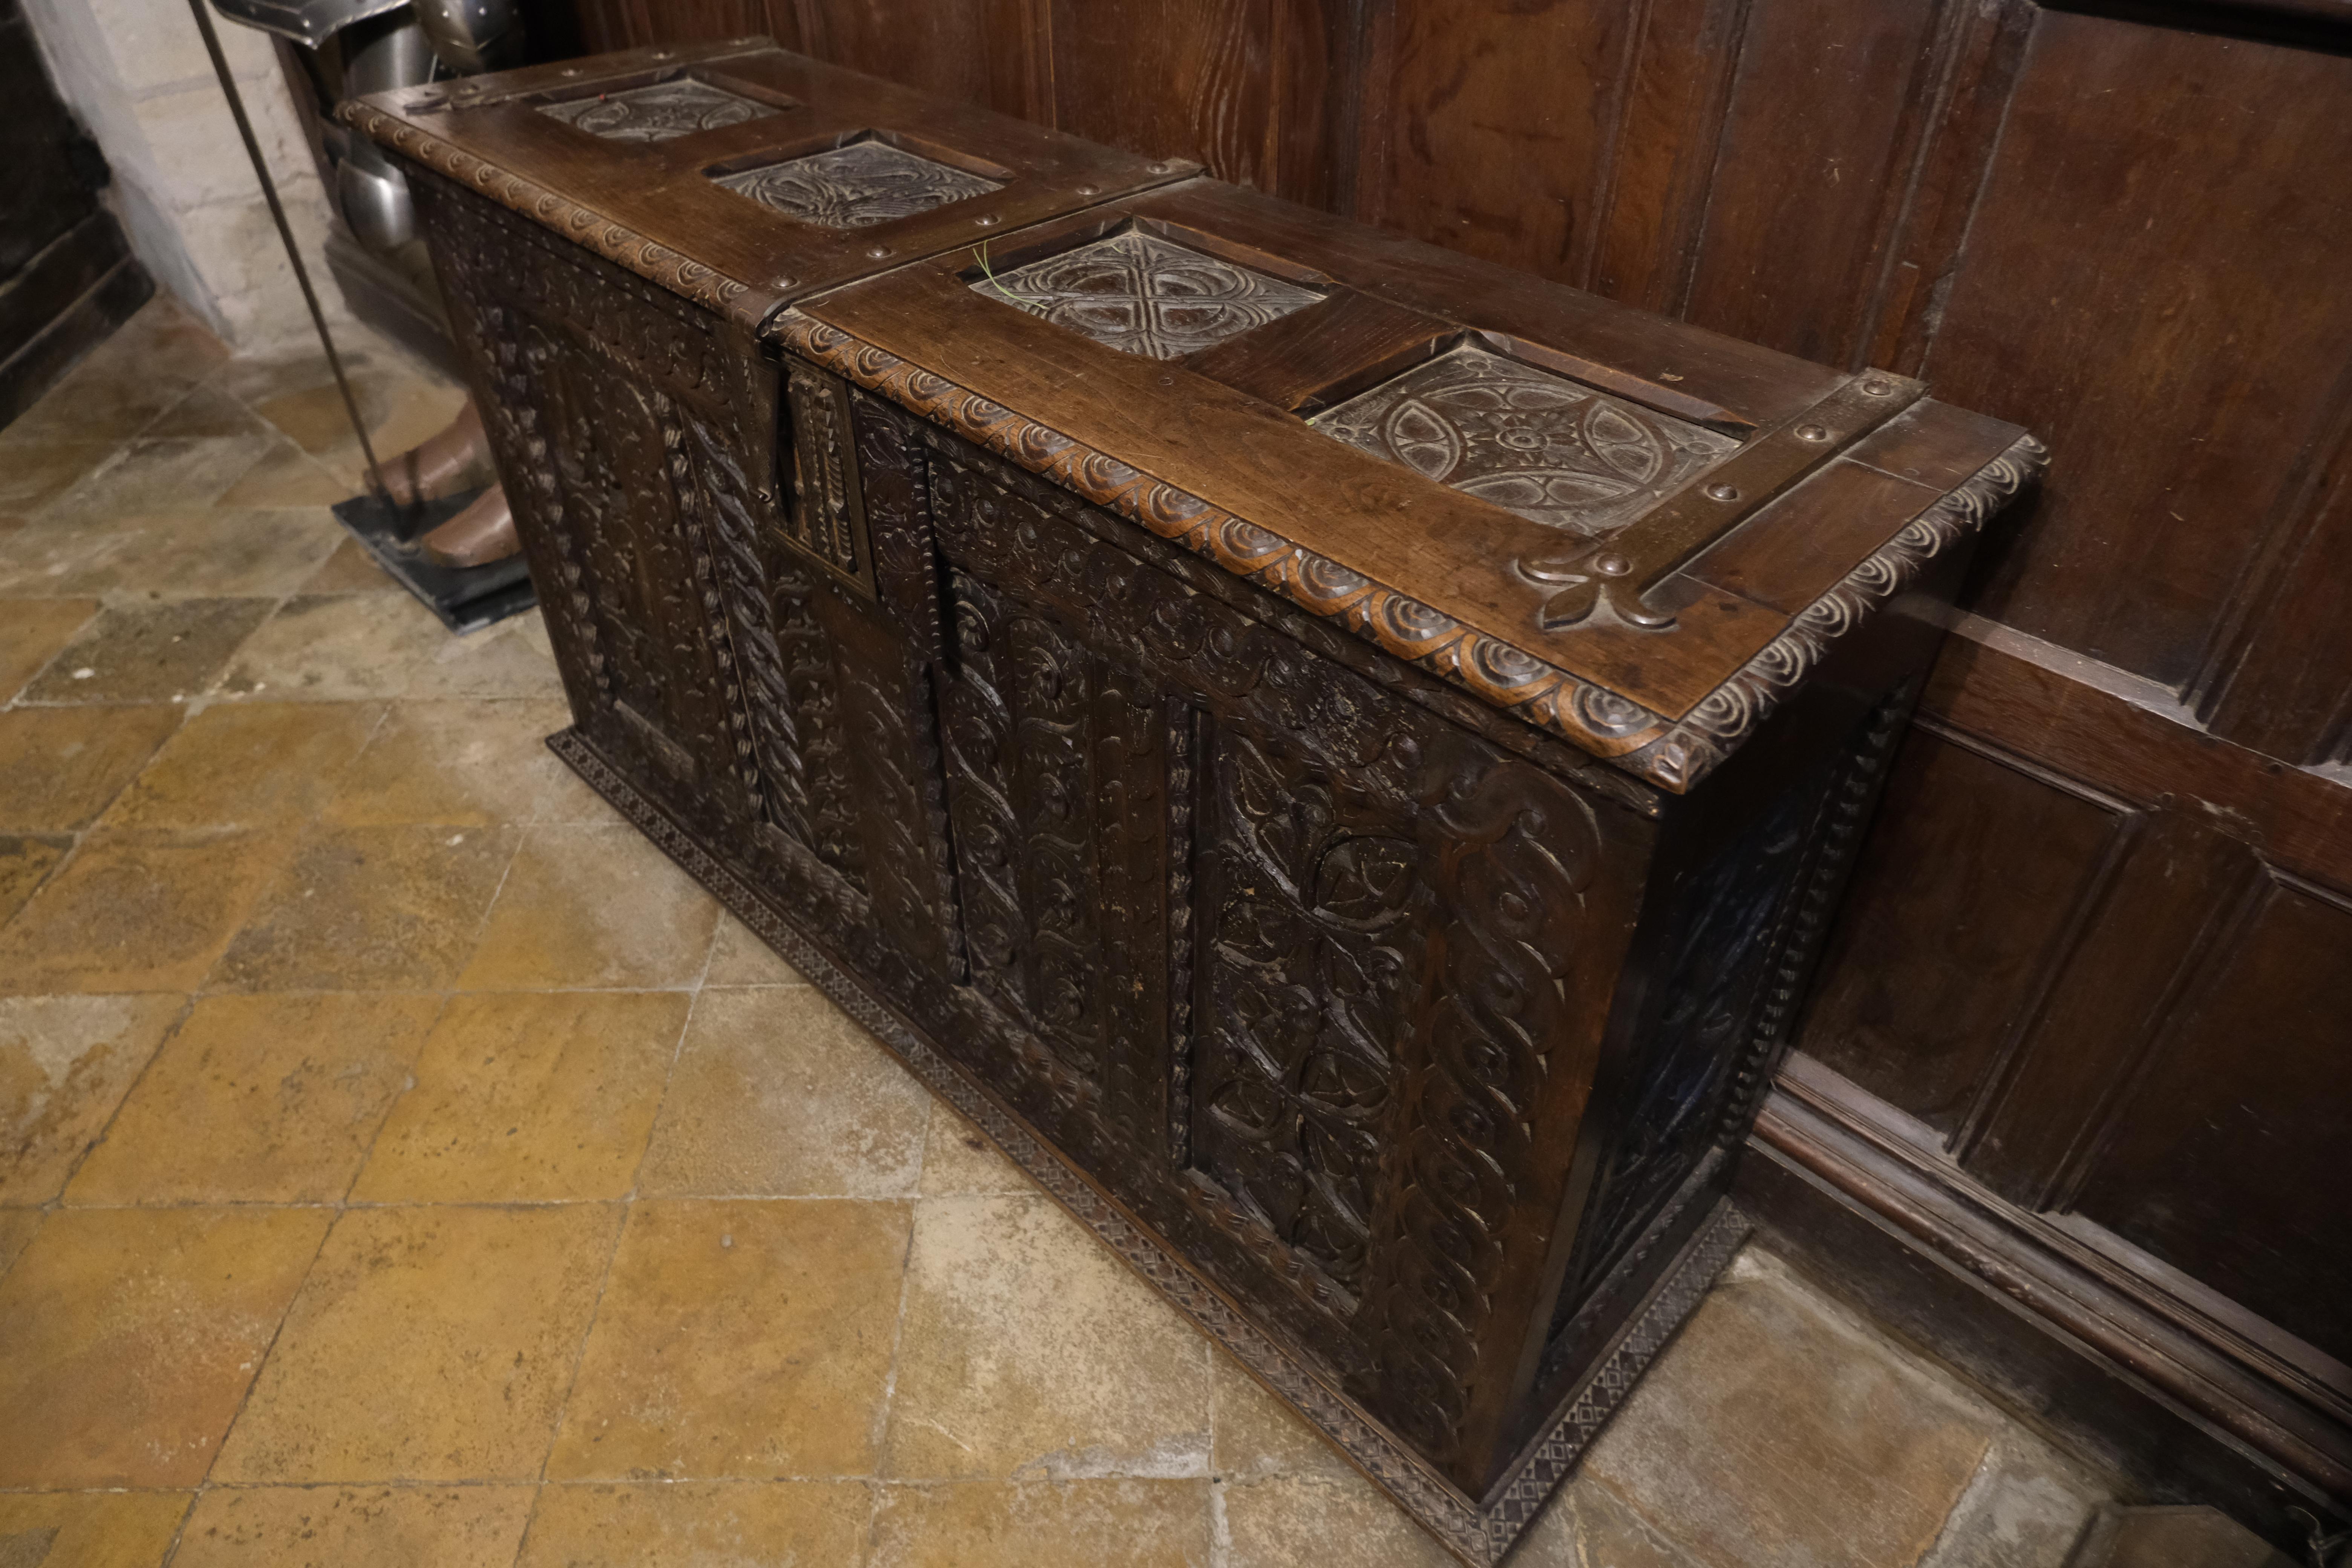 Hutton-Clarke Antiques is delighted to present an extraordinary piece of history: an antique Gothic French coffer meticulously crafted from earlier panels set within a 19th-century frame. This masterpiece exudes an opulent aesthetic, adorned with an